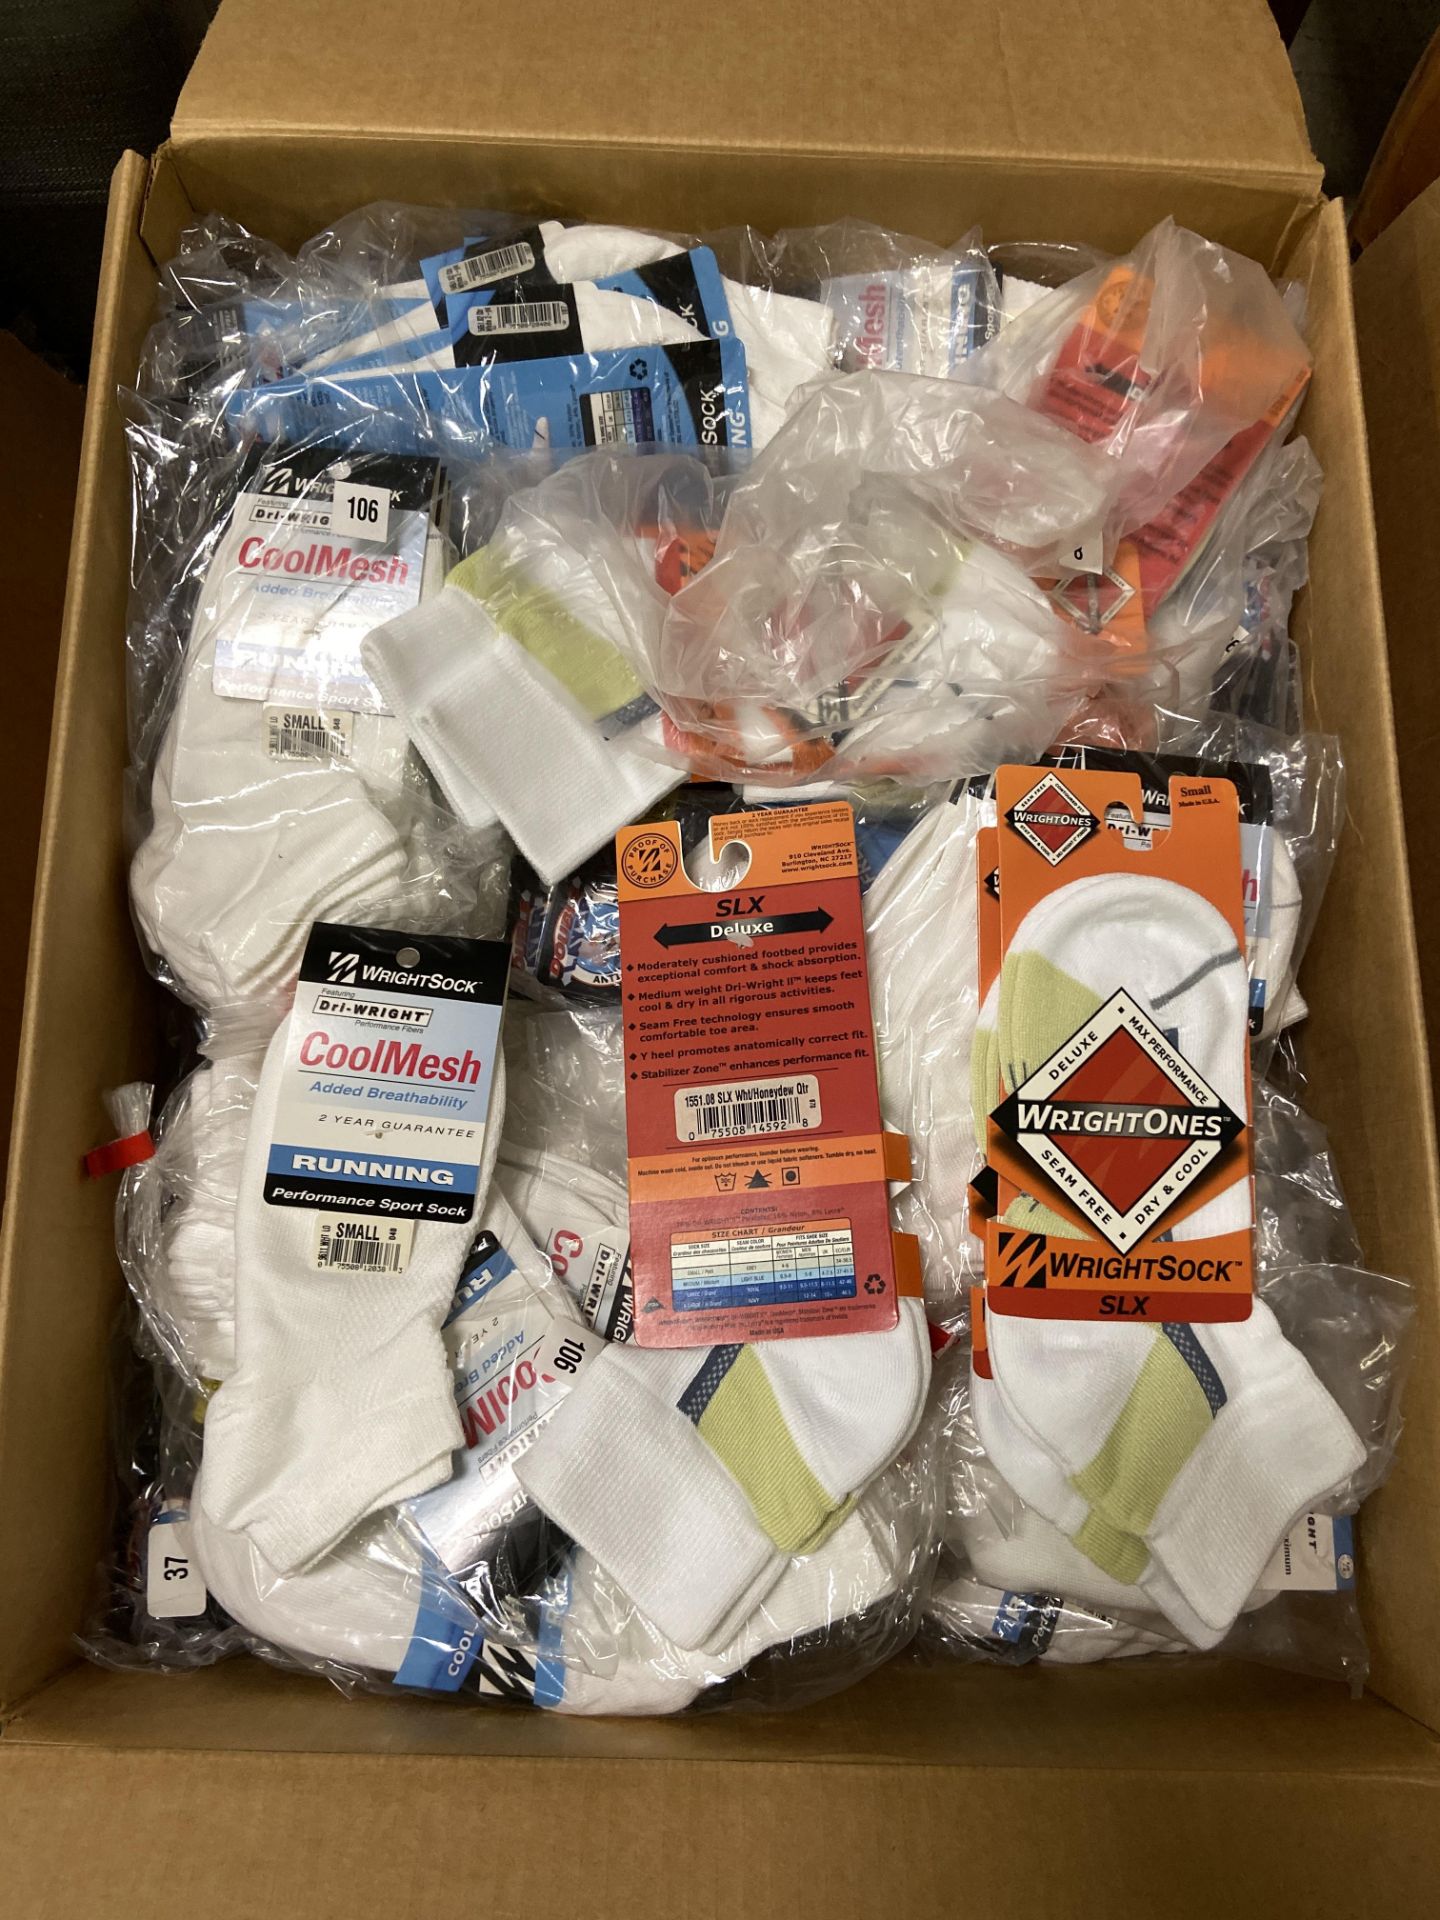 500+ packs of New Socks, Wrightsocks Various Styles, Various Colors and Styles - Image 2 of 6